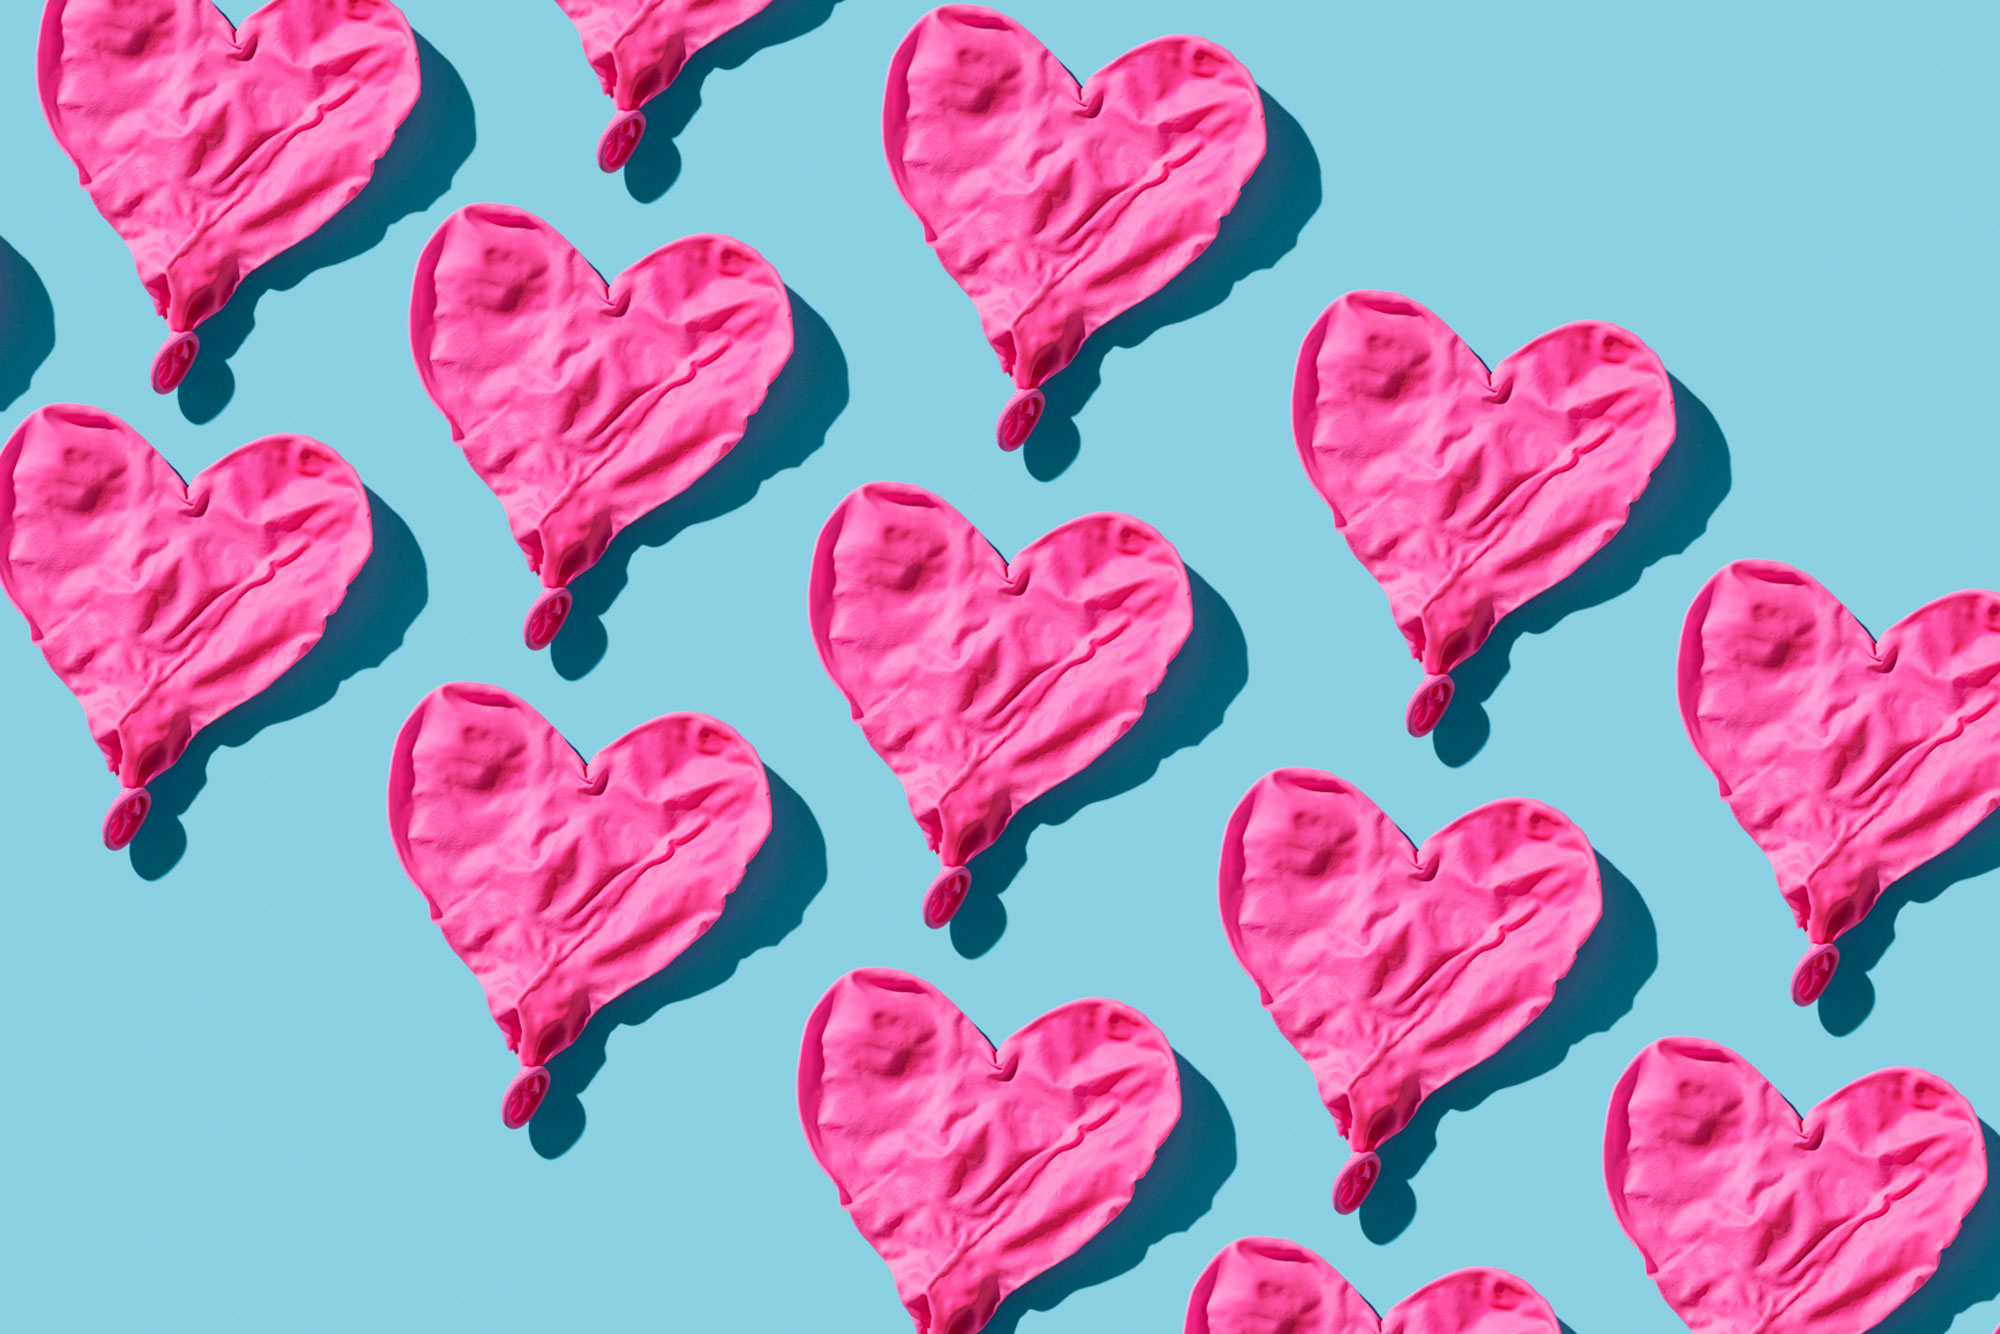 deflated hearts on blue background